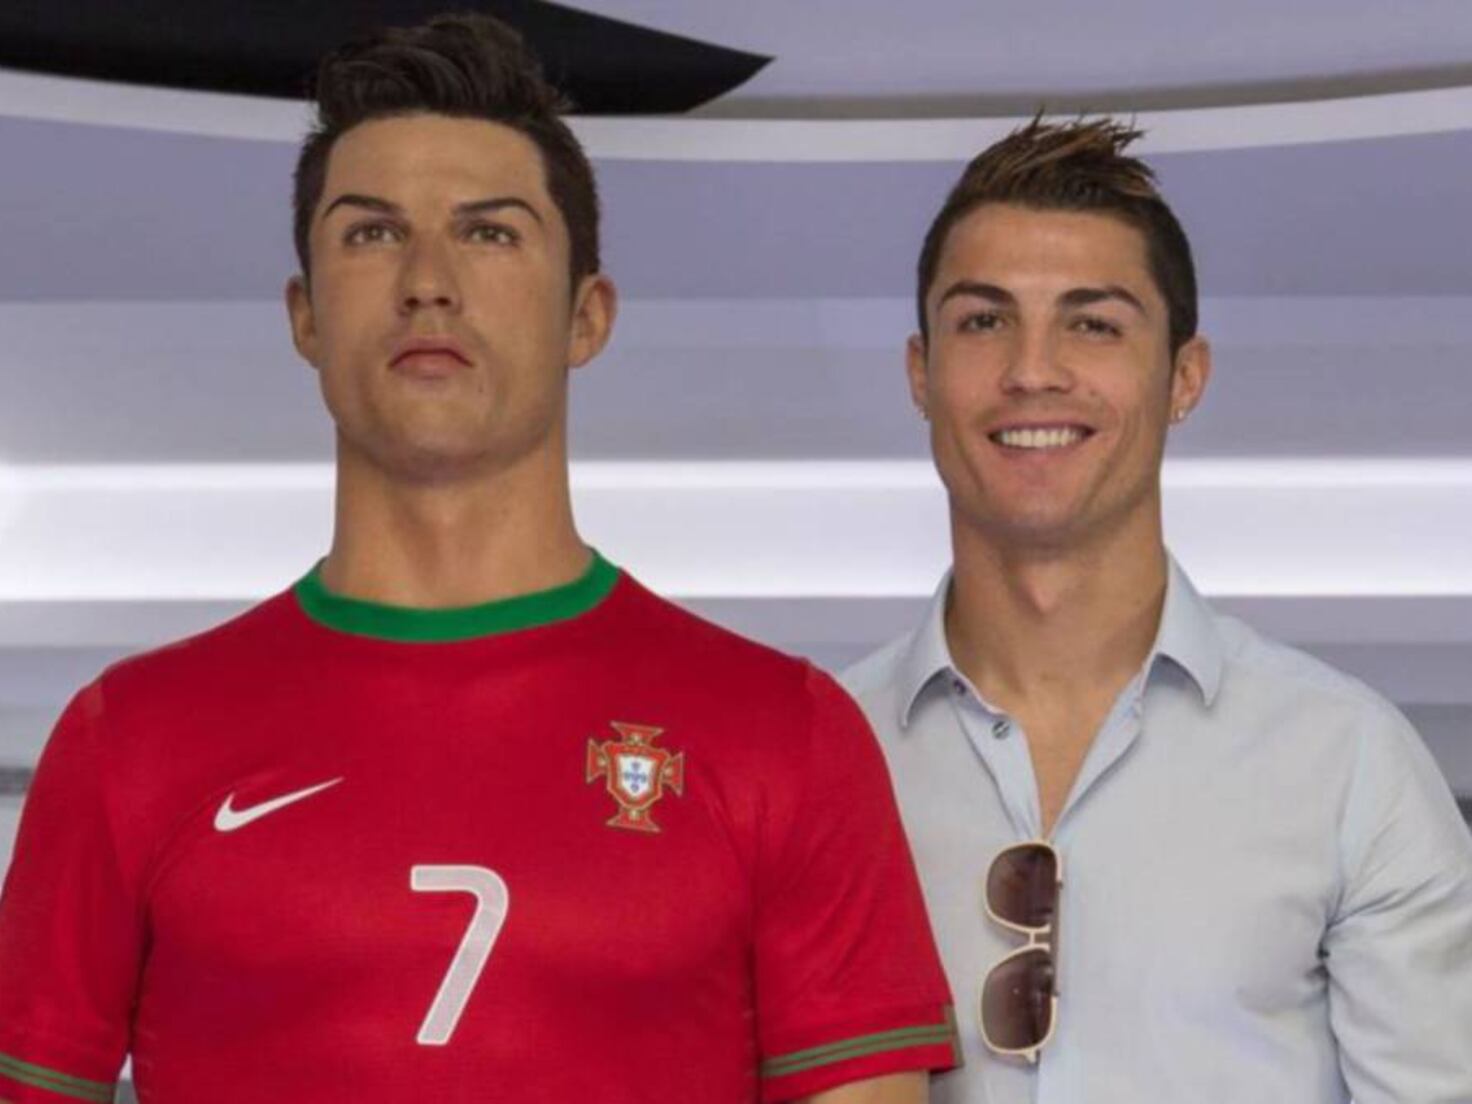 Cristiano Ronaldo launches new fragrance as he prepares for Real Madrid  return